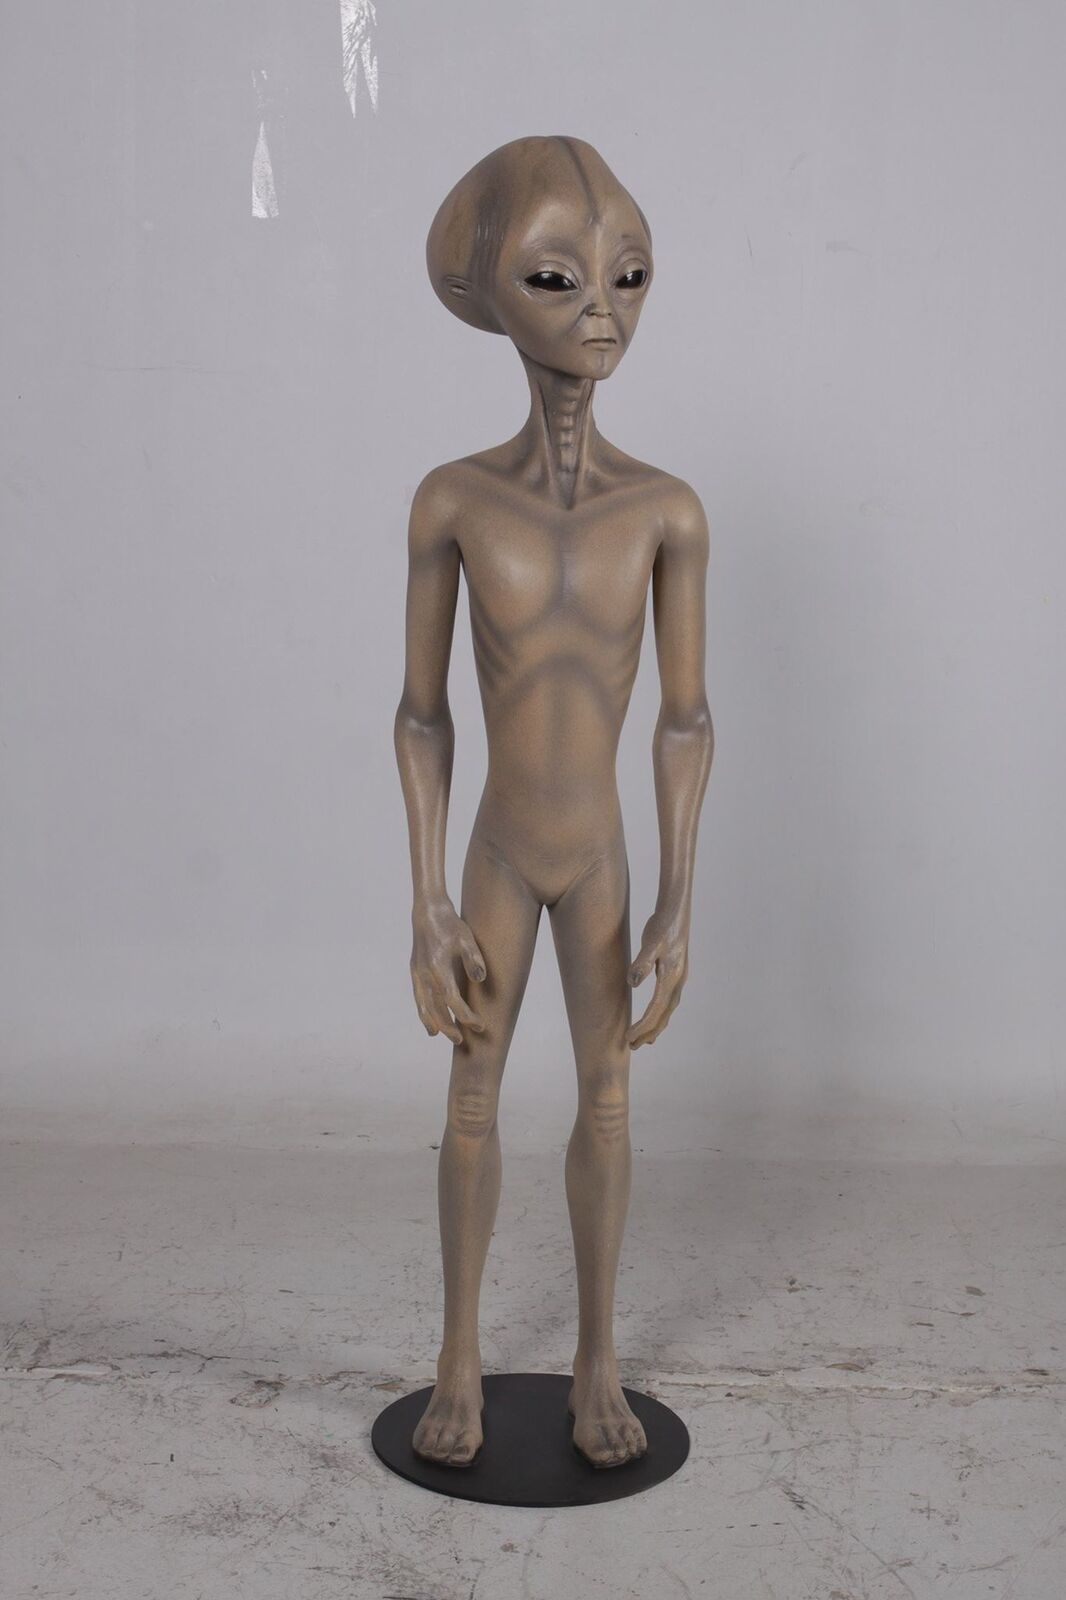 Gray Alien Life Size Resin Statue Prop Decor Outer Space Theme Display Area 51